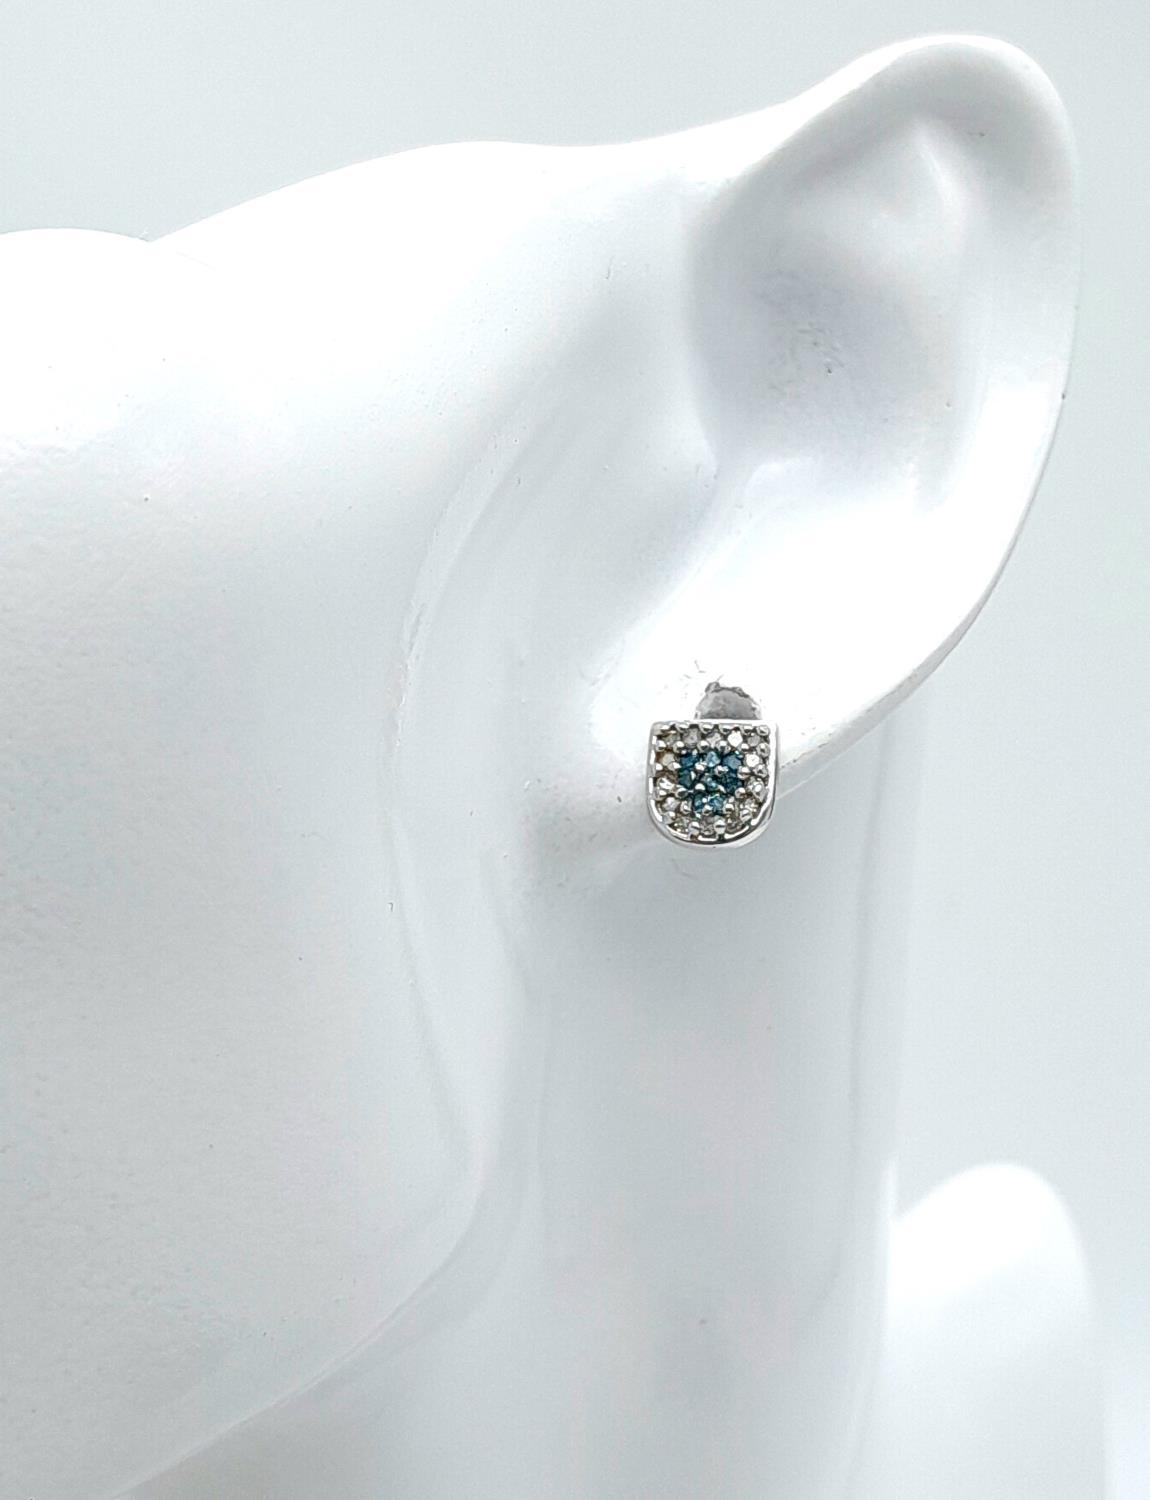 A 9K WHITE GOLD WHITE & BLUE DIAMOND STUD EARRINGS 0.20CT 1.7G . ref: A/S 1067 - Image 5 of 5